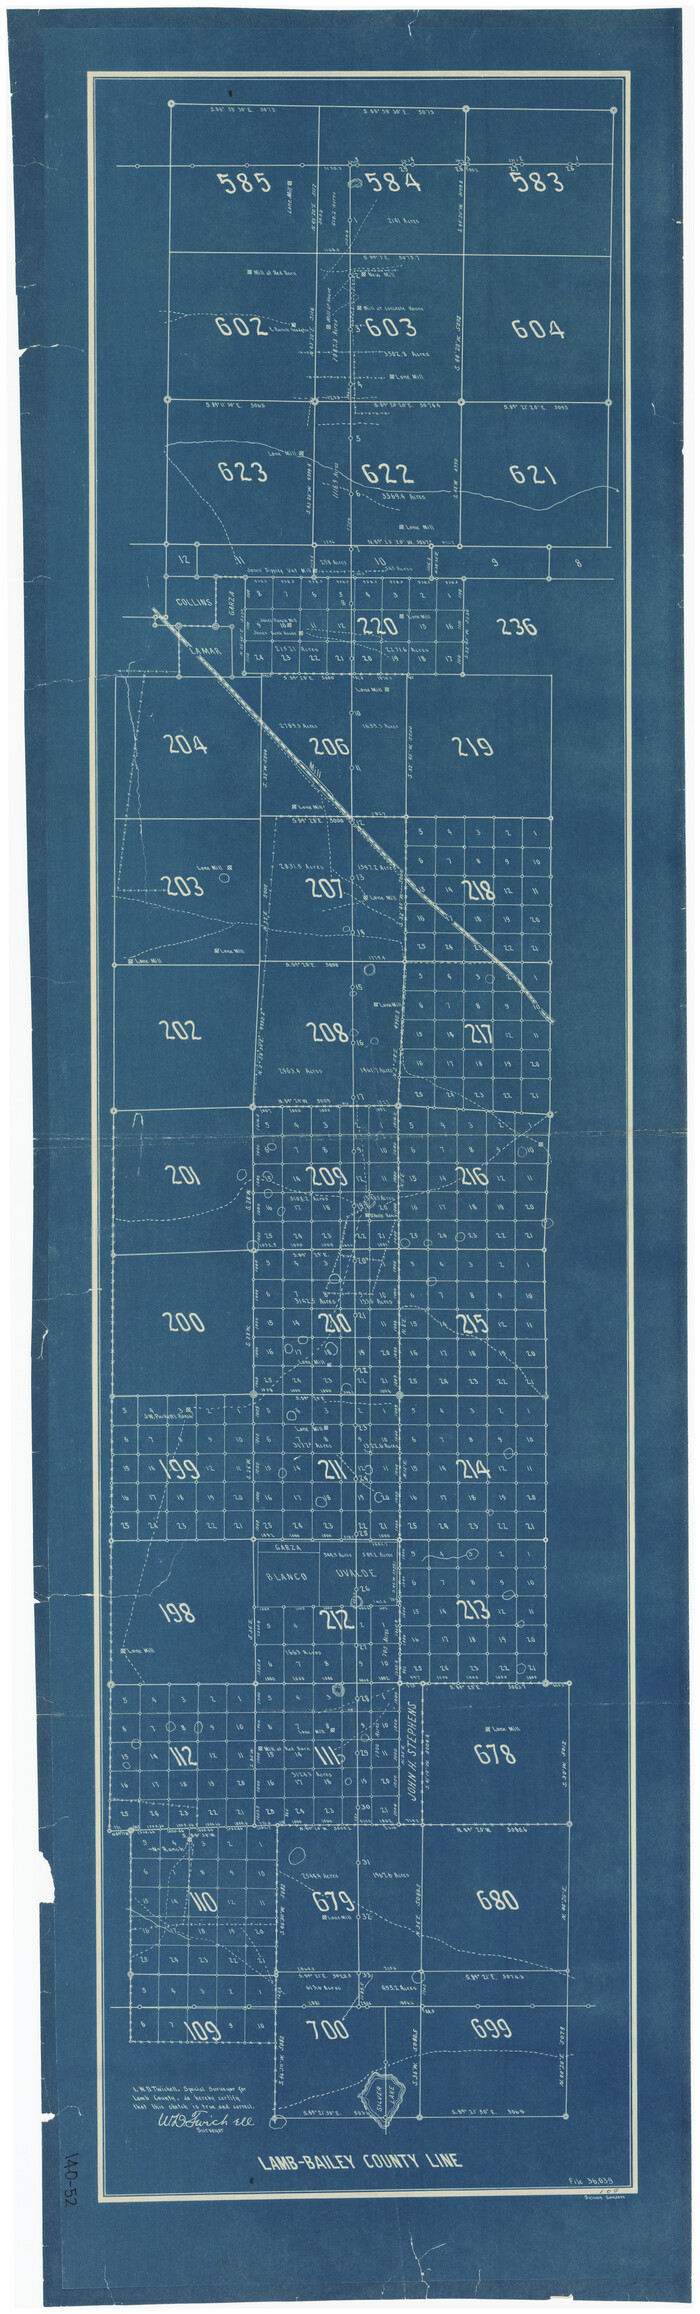 89671, Lamb-Bailey County Line, Twichell Survey Records